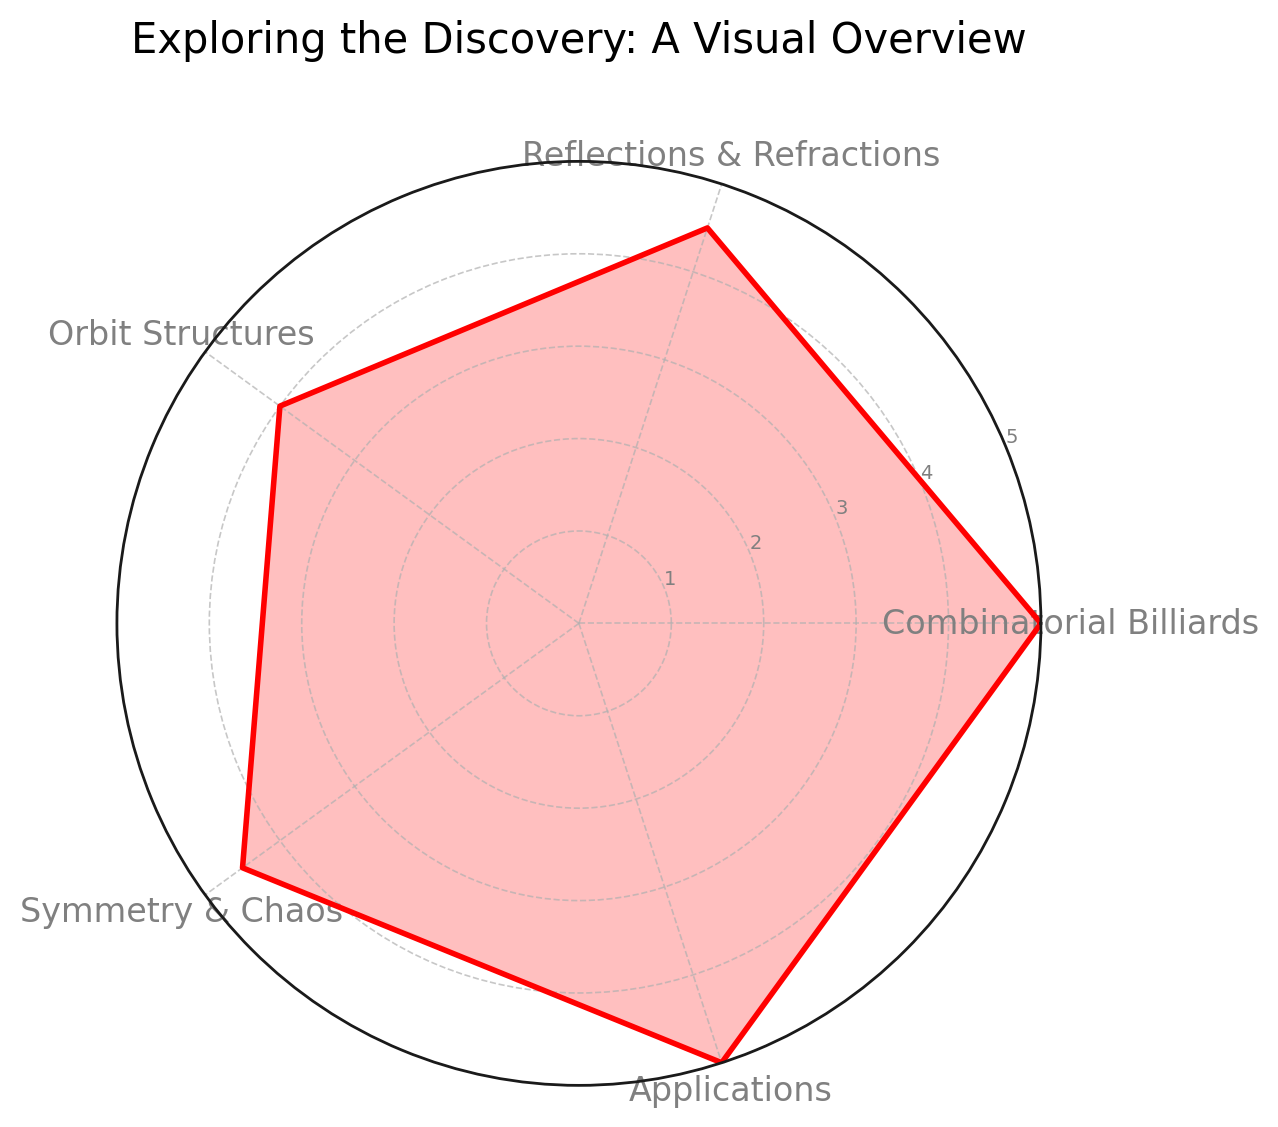 A radar chart displaying the key components of the discovery in toric promotion with reflections and refractions, with axes for Combinatorial Billiards, Reflections & Refractions, Orbit Structures, Symmetry & Chaos, and Applications, each rated on a scale from 1 to 5 for their significance and impact.